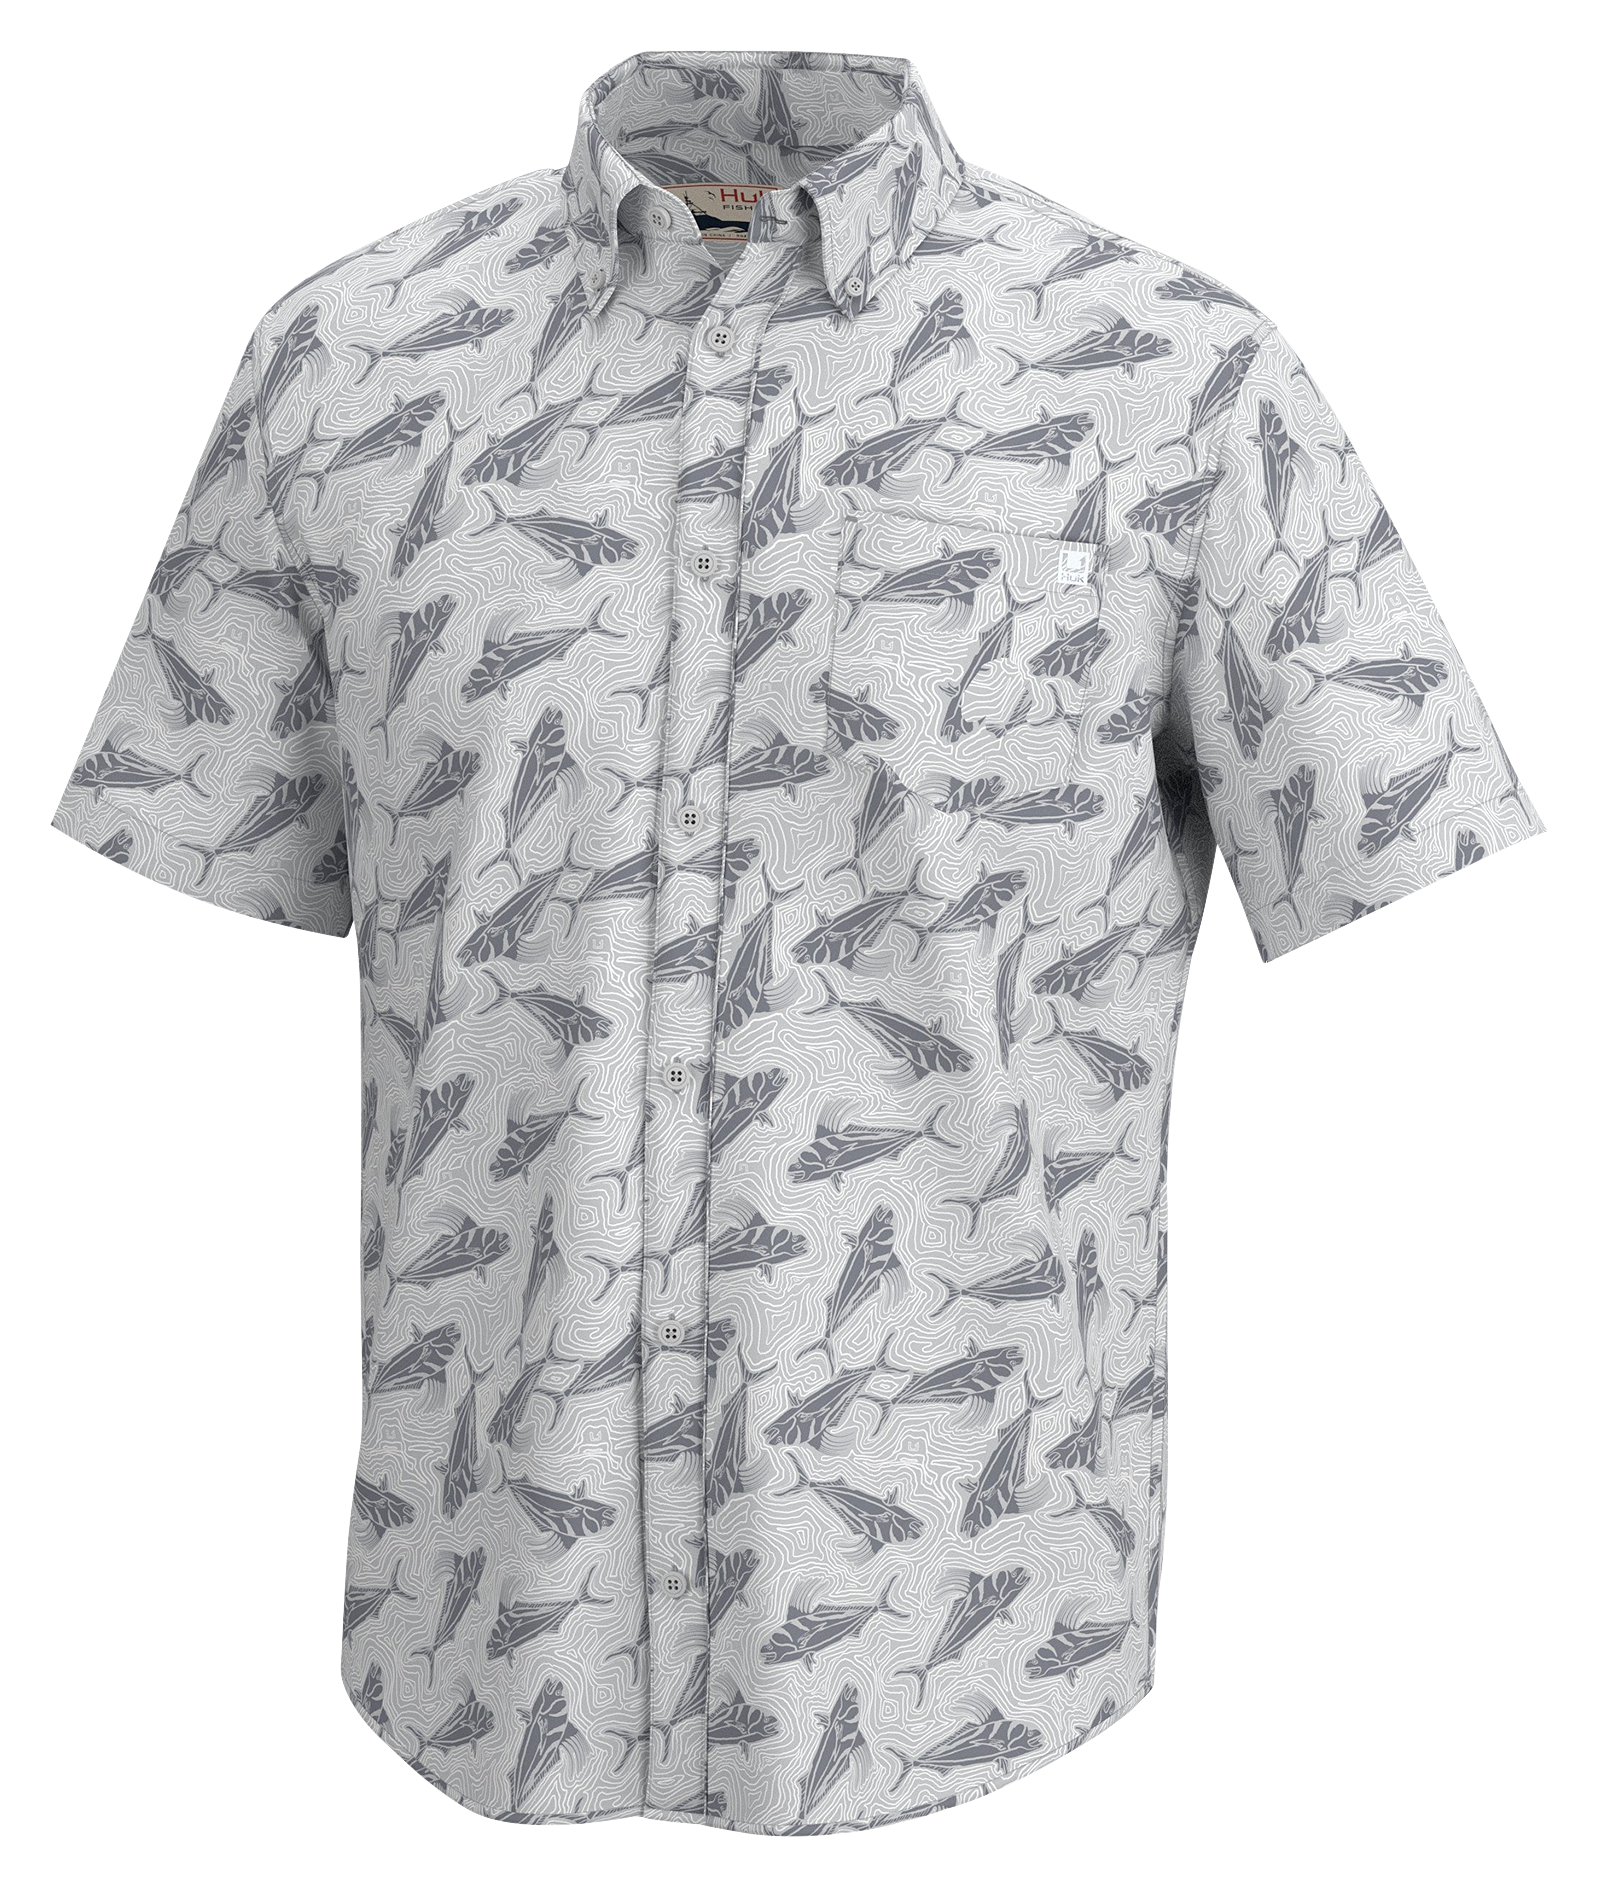 Huk Kona Fish and Flags Short-Sleeve Button-Down Shirt for Men